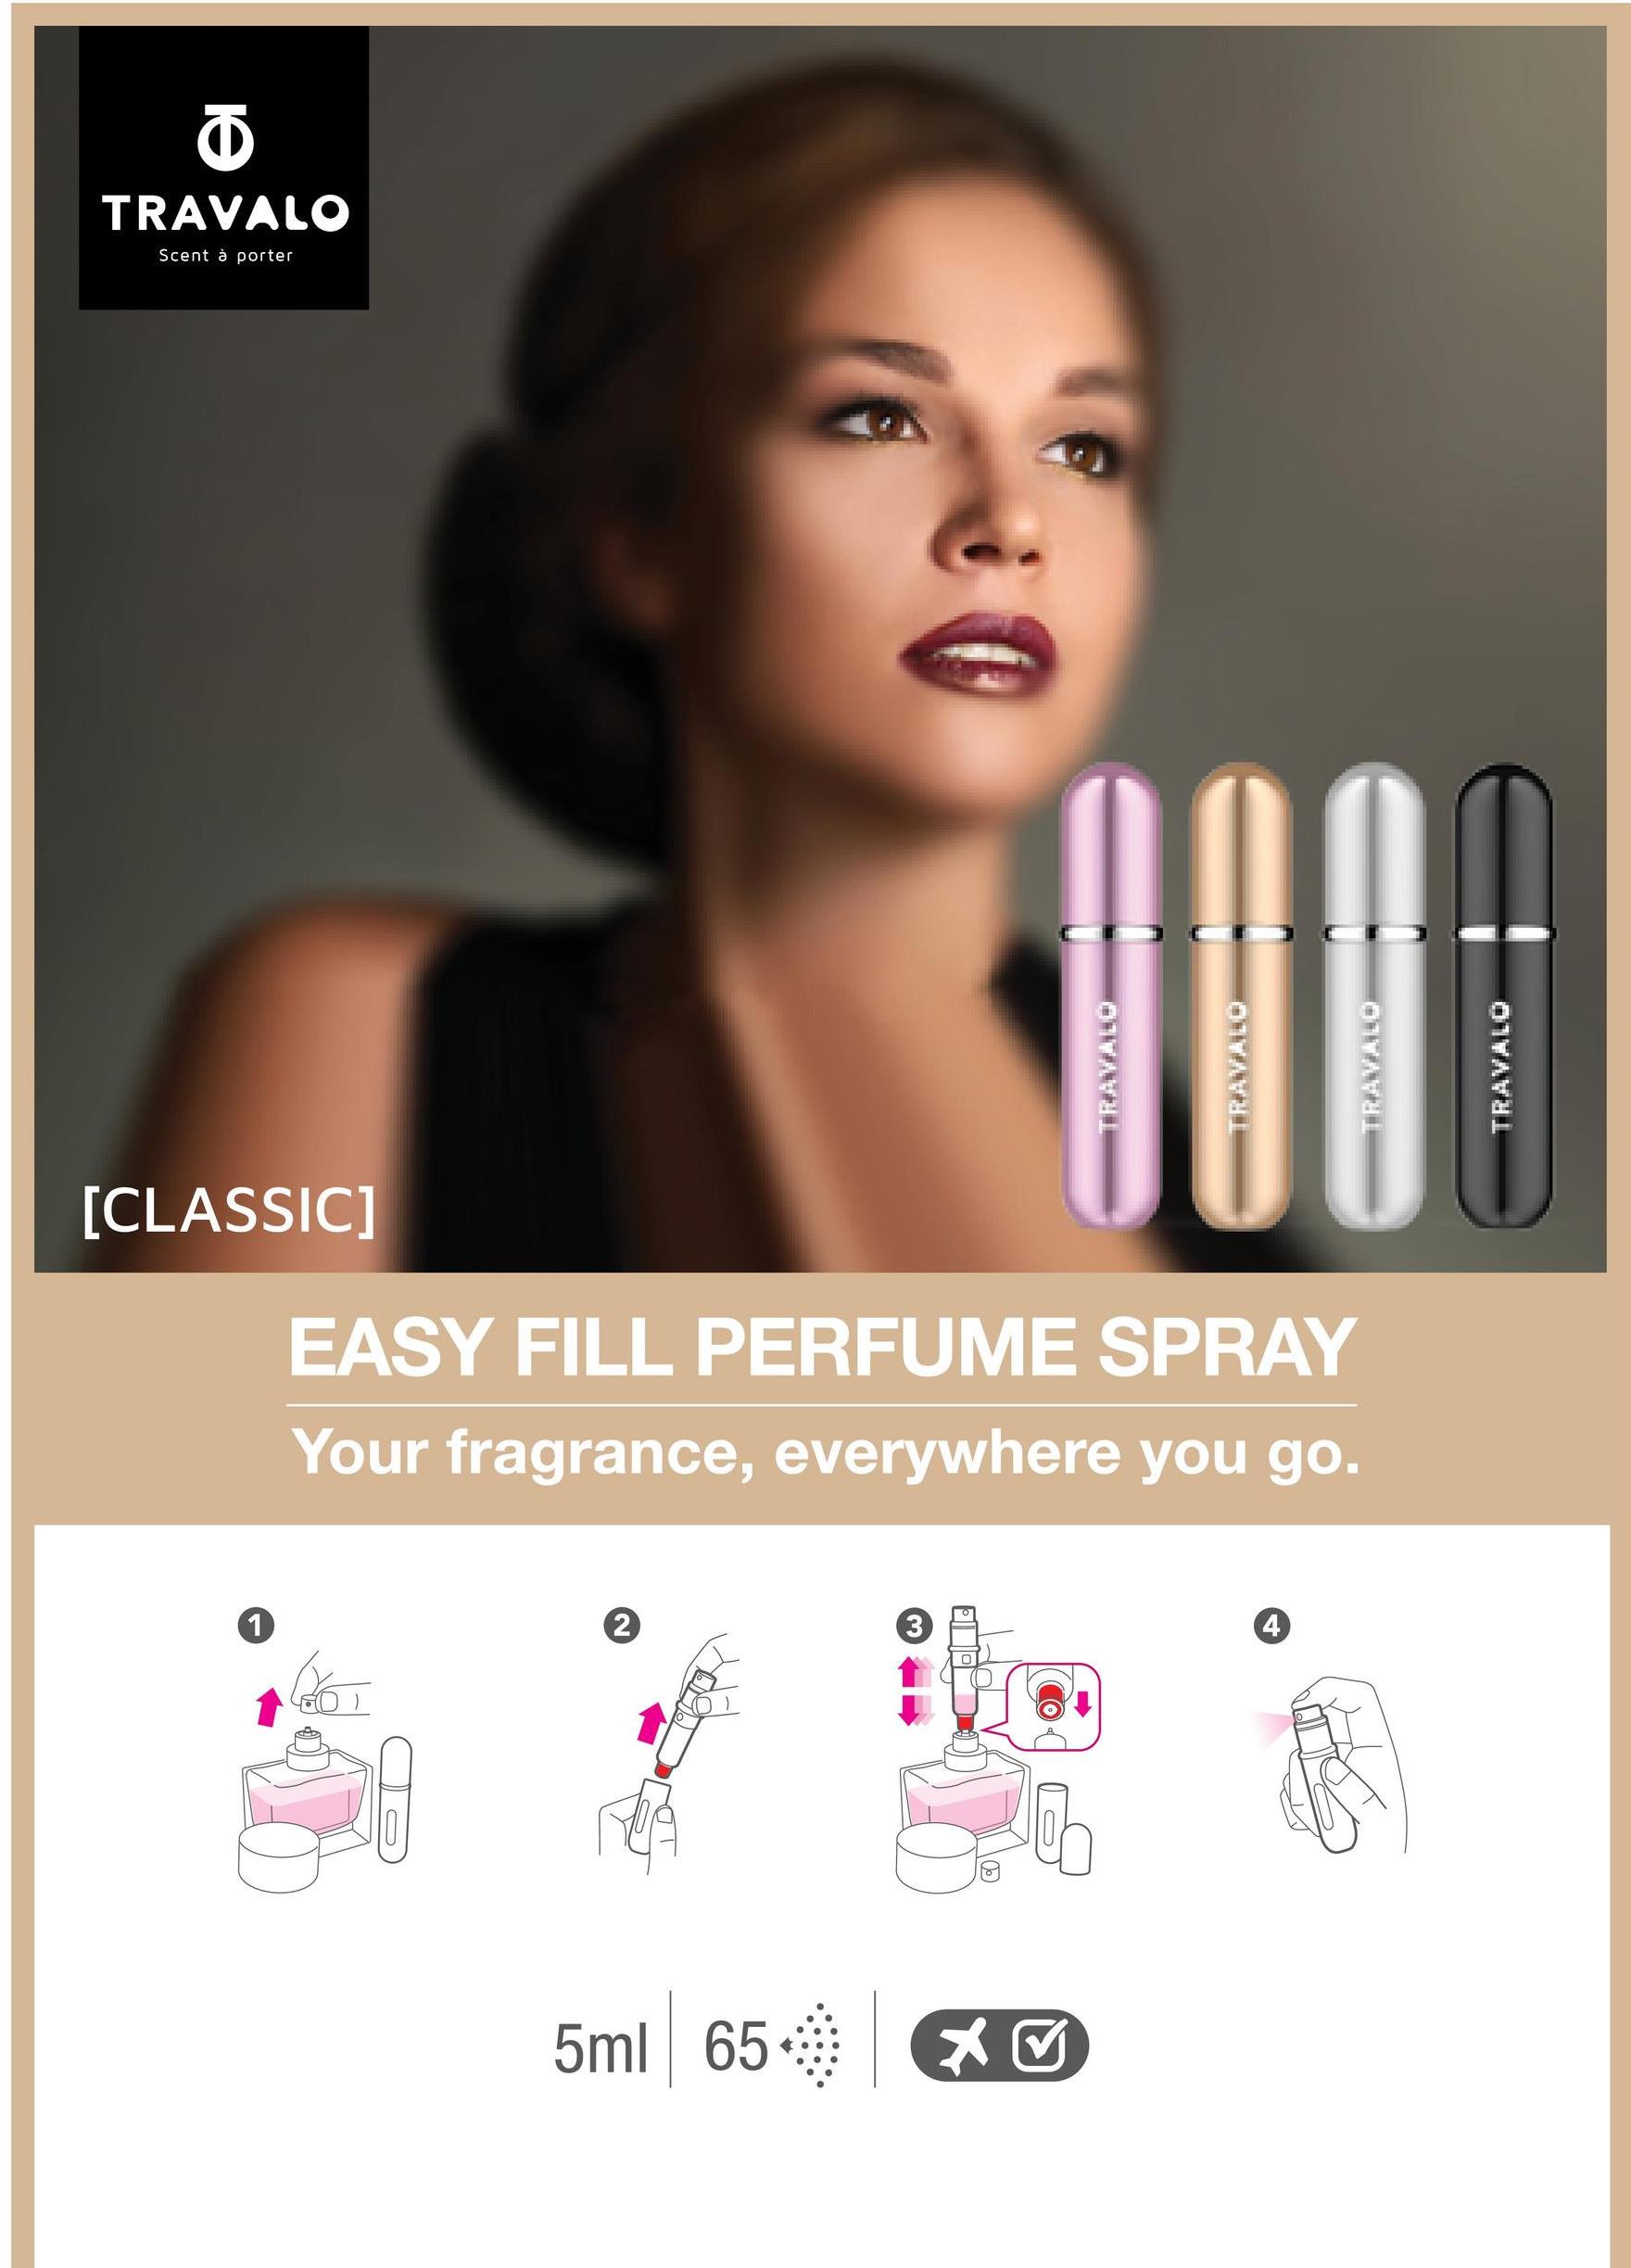 5
TRAVALO
Scent à porter
[CLASSIC]
000
EASY FILL PERFUME SPRAY
Your fragrance, everywhere you go.
1
2
3
4
| * ✔
5ml 65
TRAVALO